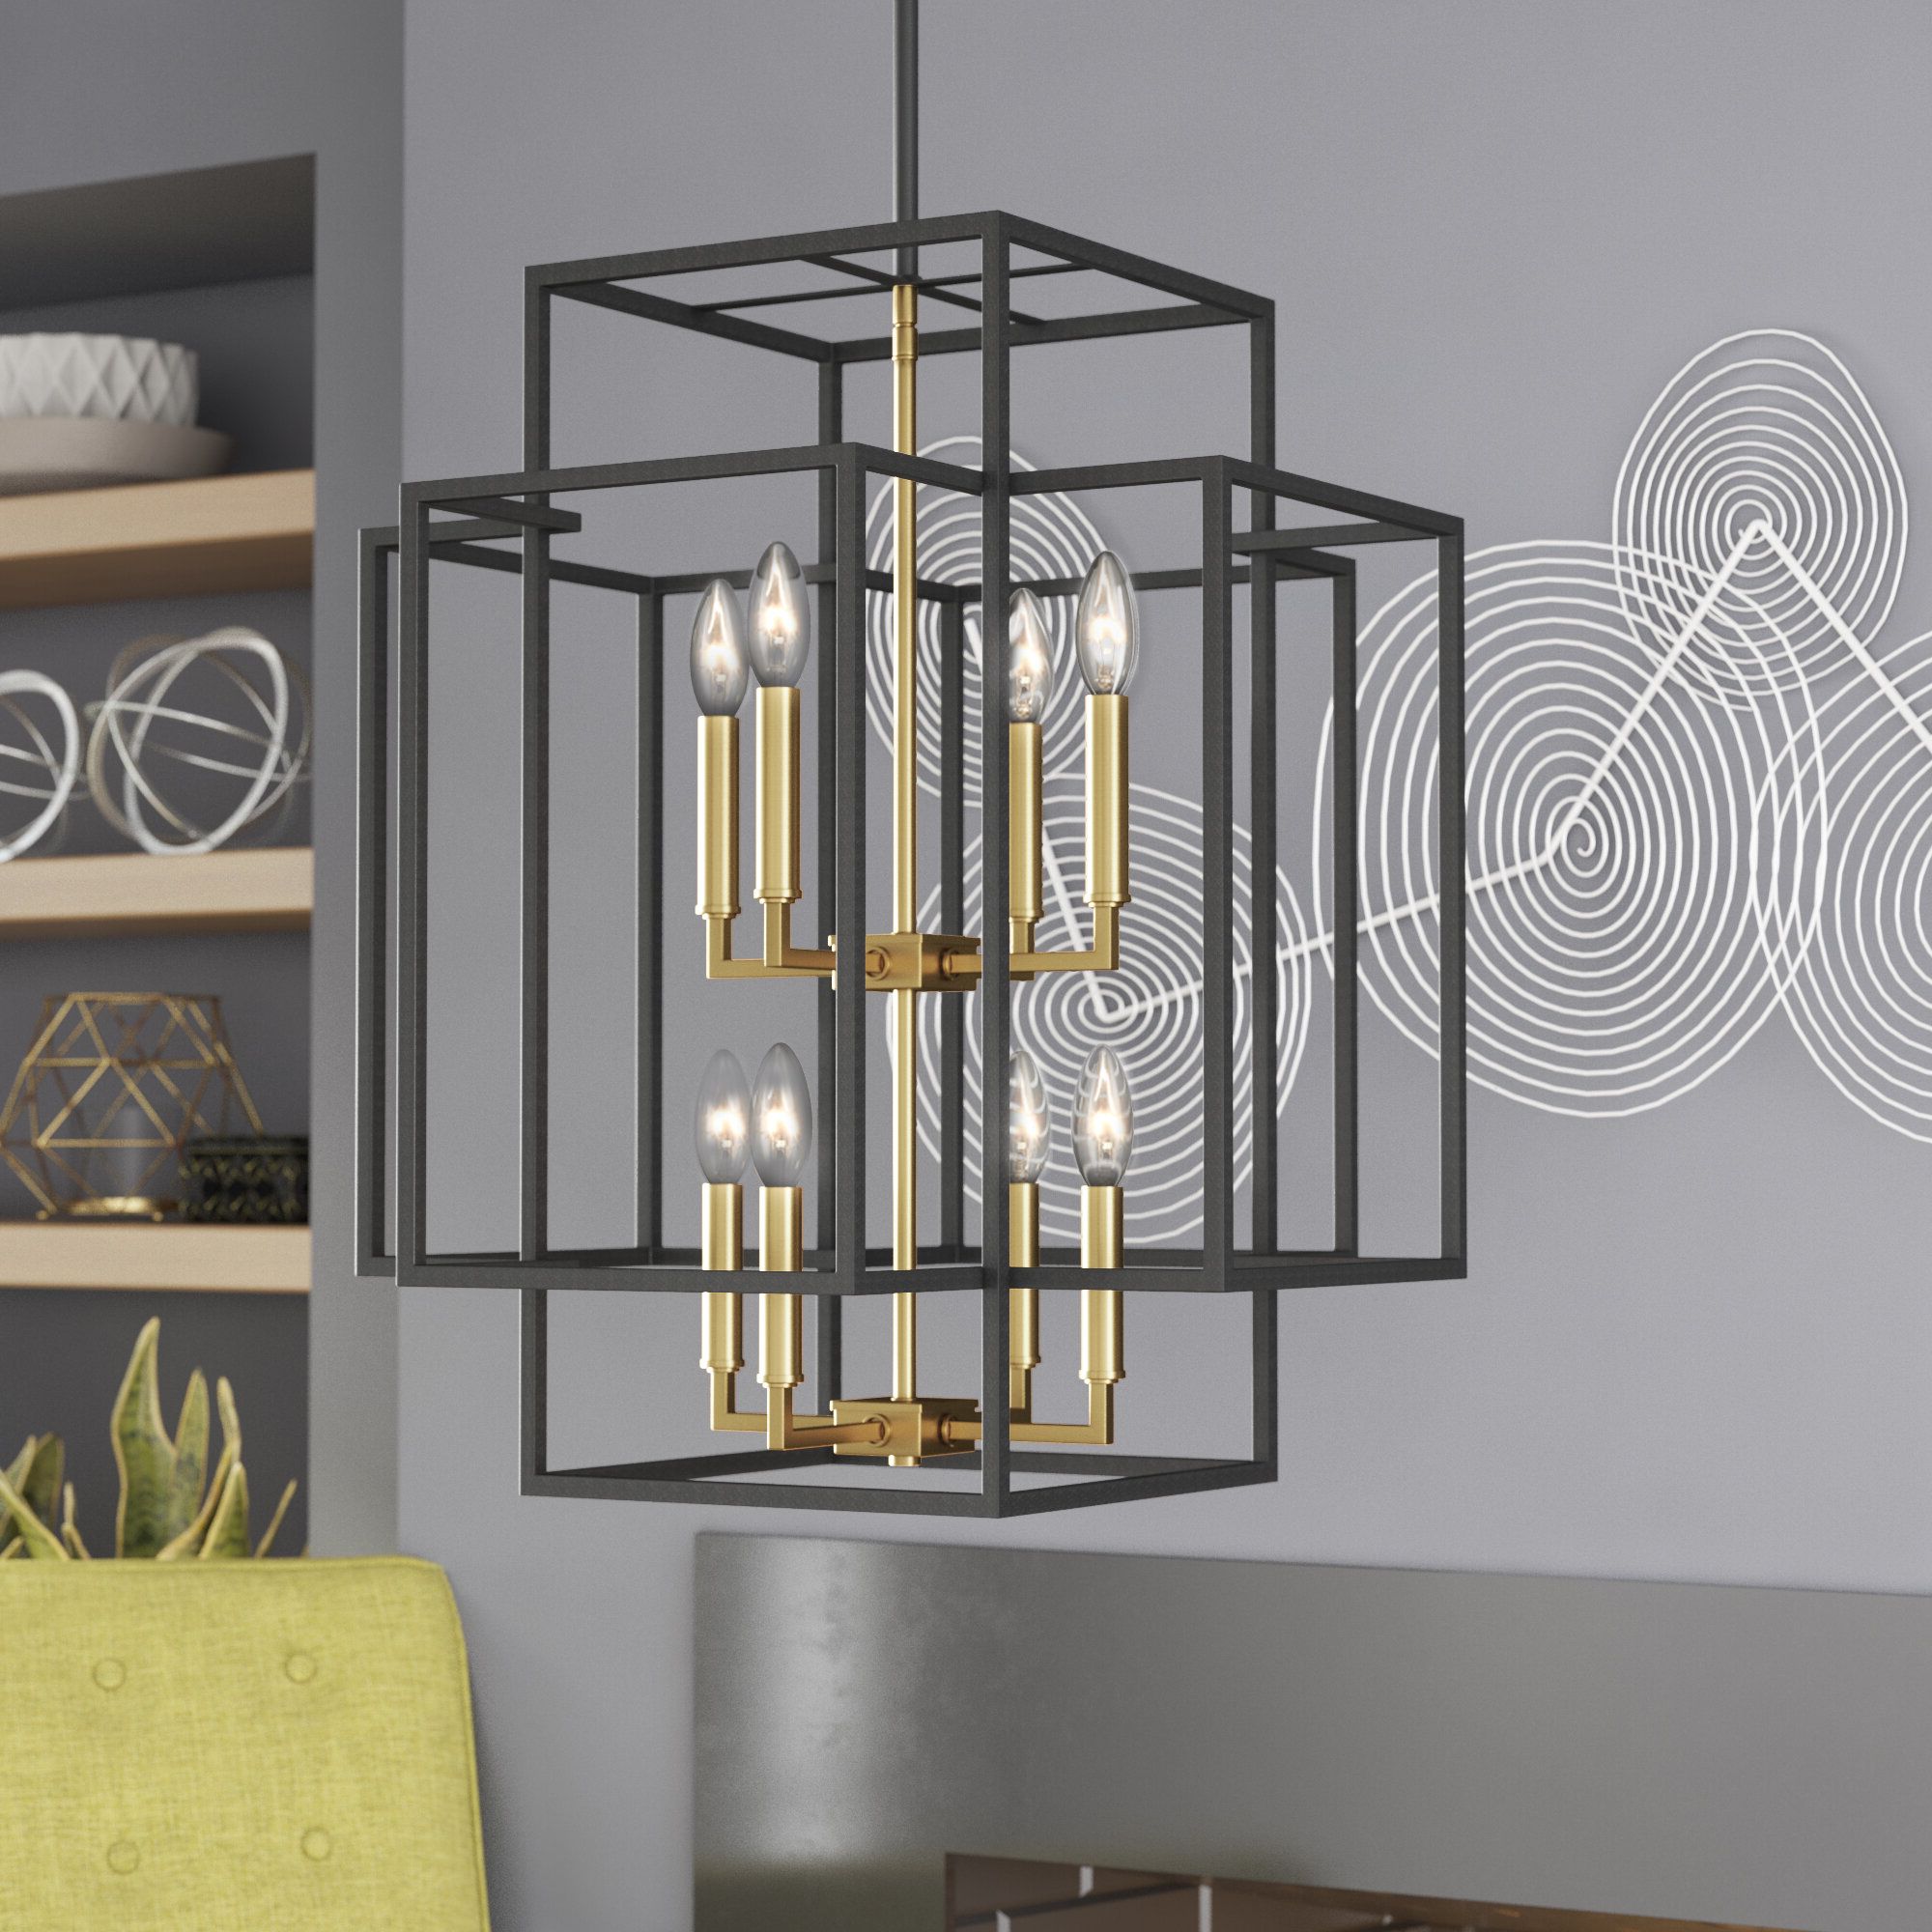 Wayfair For Fashionable Eight Light Lantern Chandeliers (View 3 of 10)